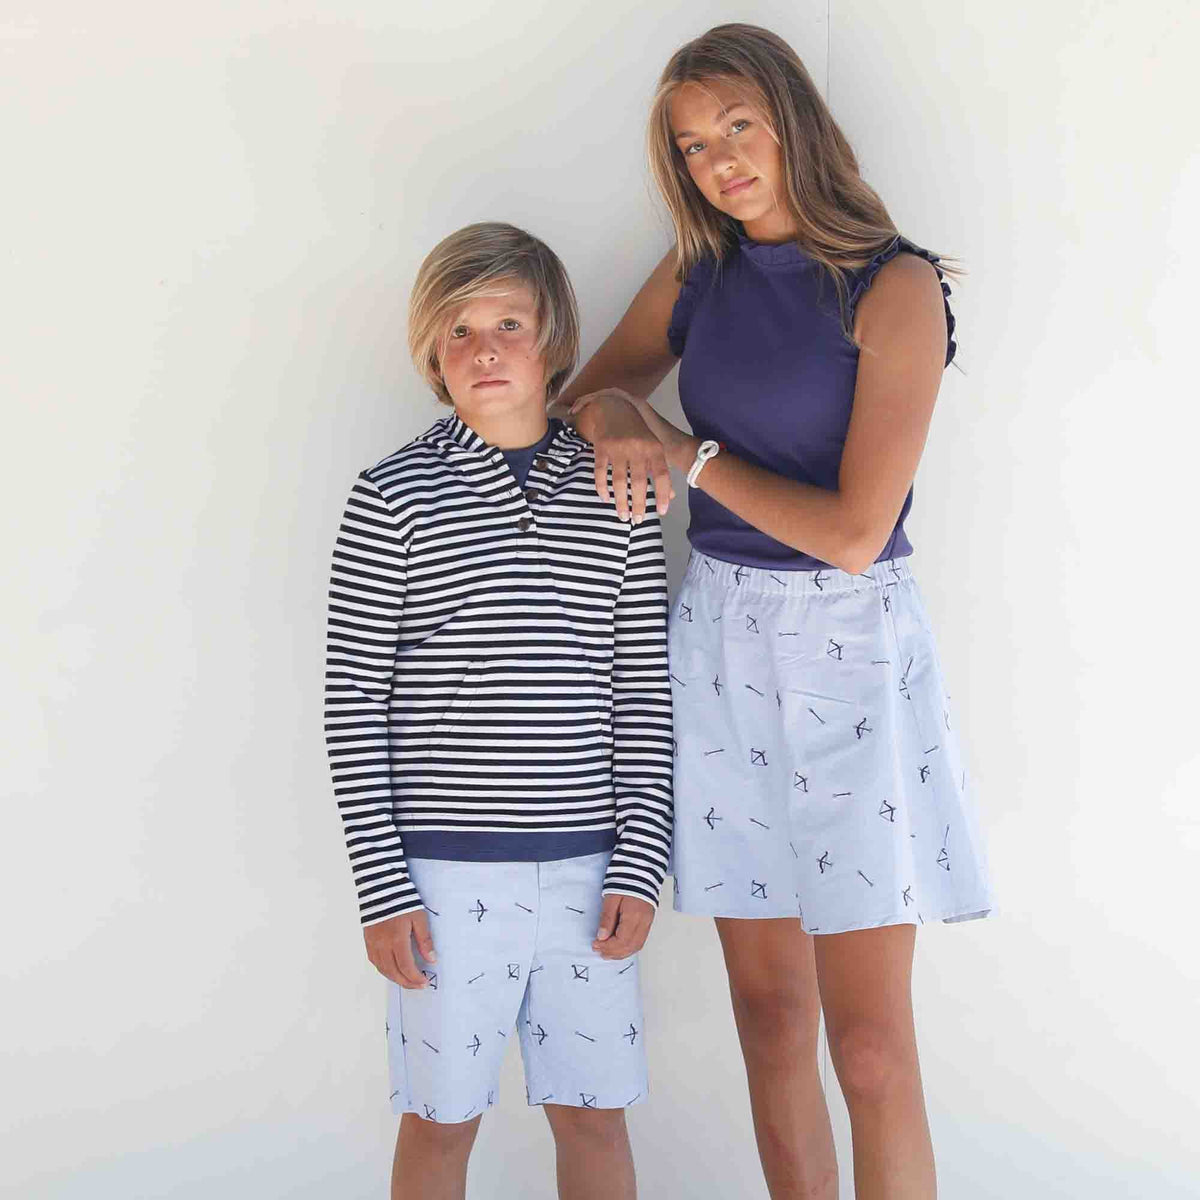 Classic and Preppy Hudson Short, Bow &amp; Arrow Embroidery-Bottoms-CPC - Classic Prep Childrenswear